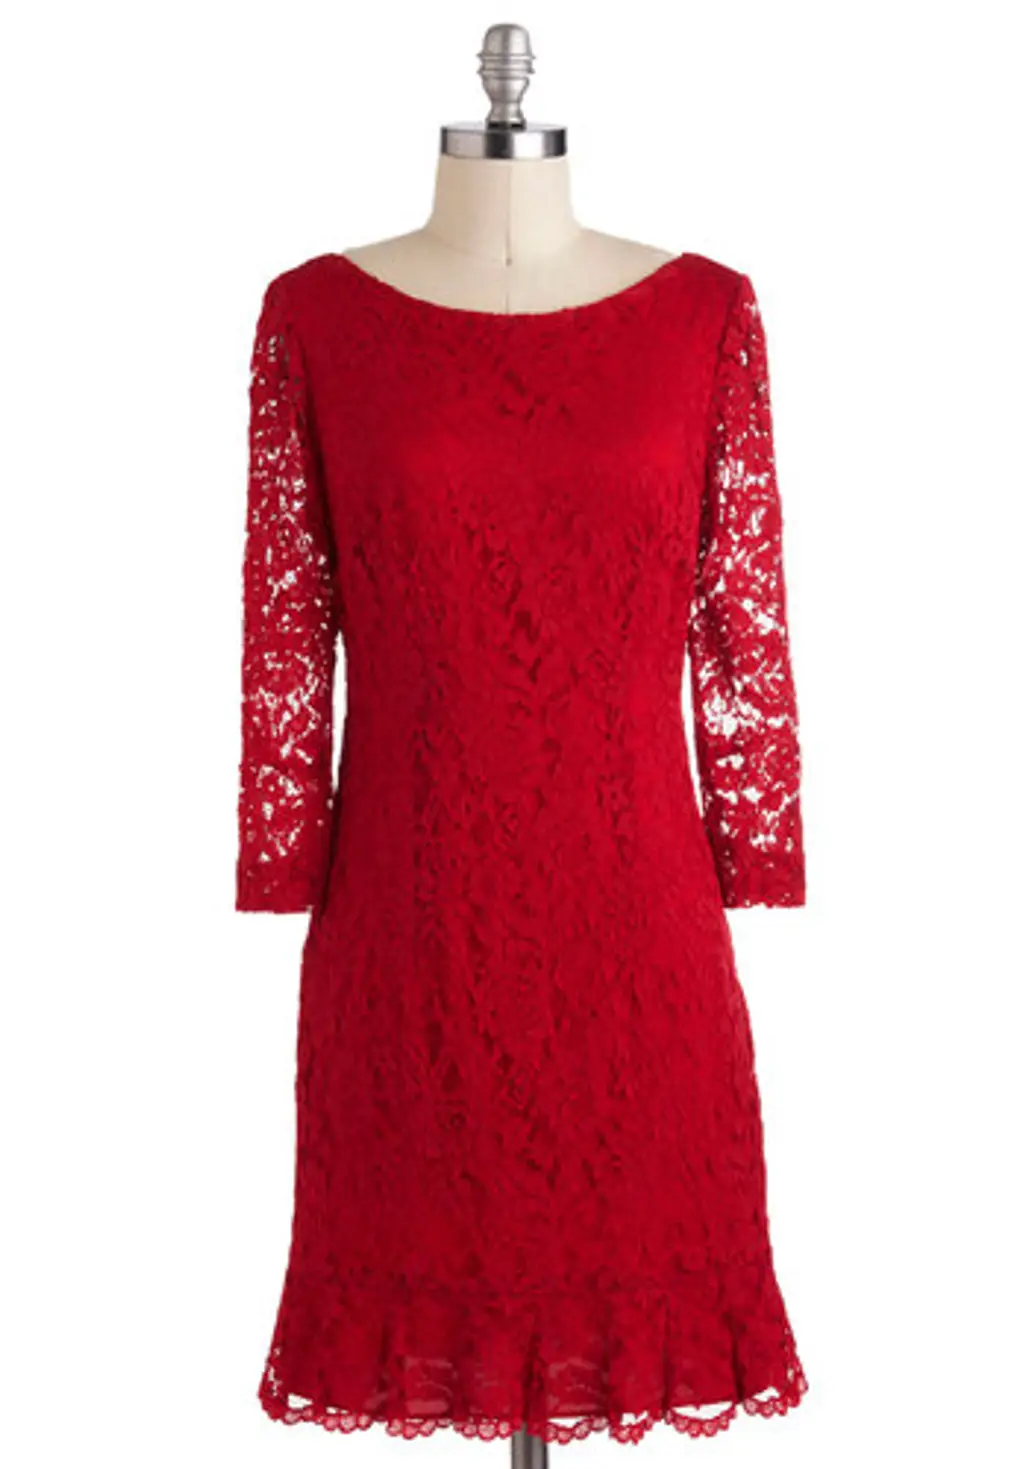 7 Cute Holiday Dresses ...